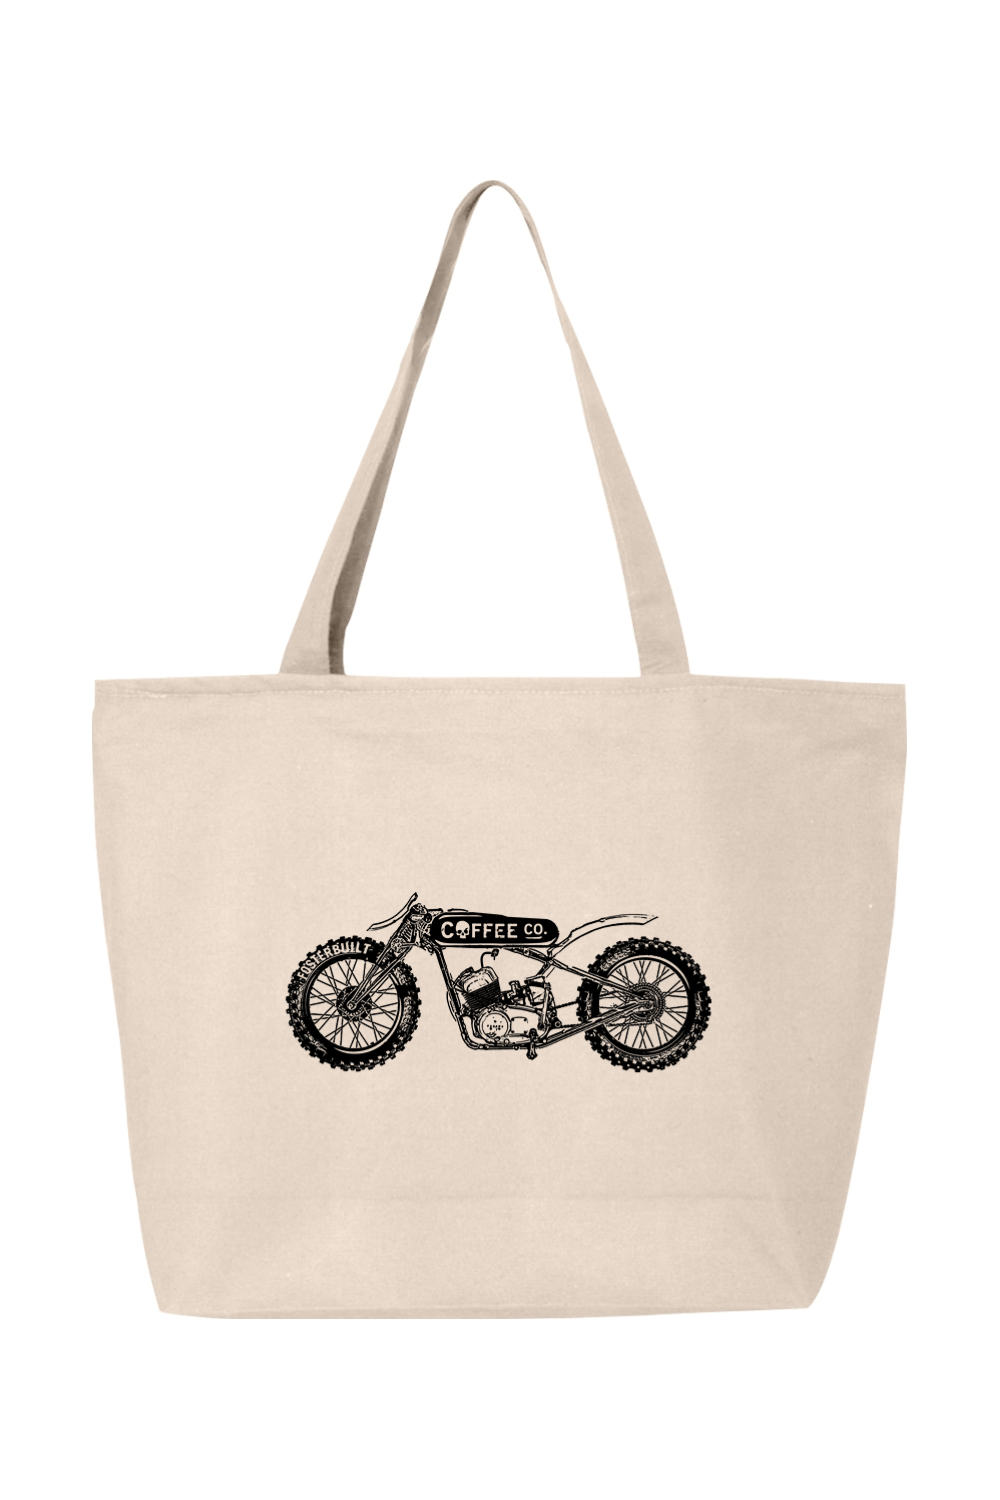 MOTO - Canvas Zippered Tote